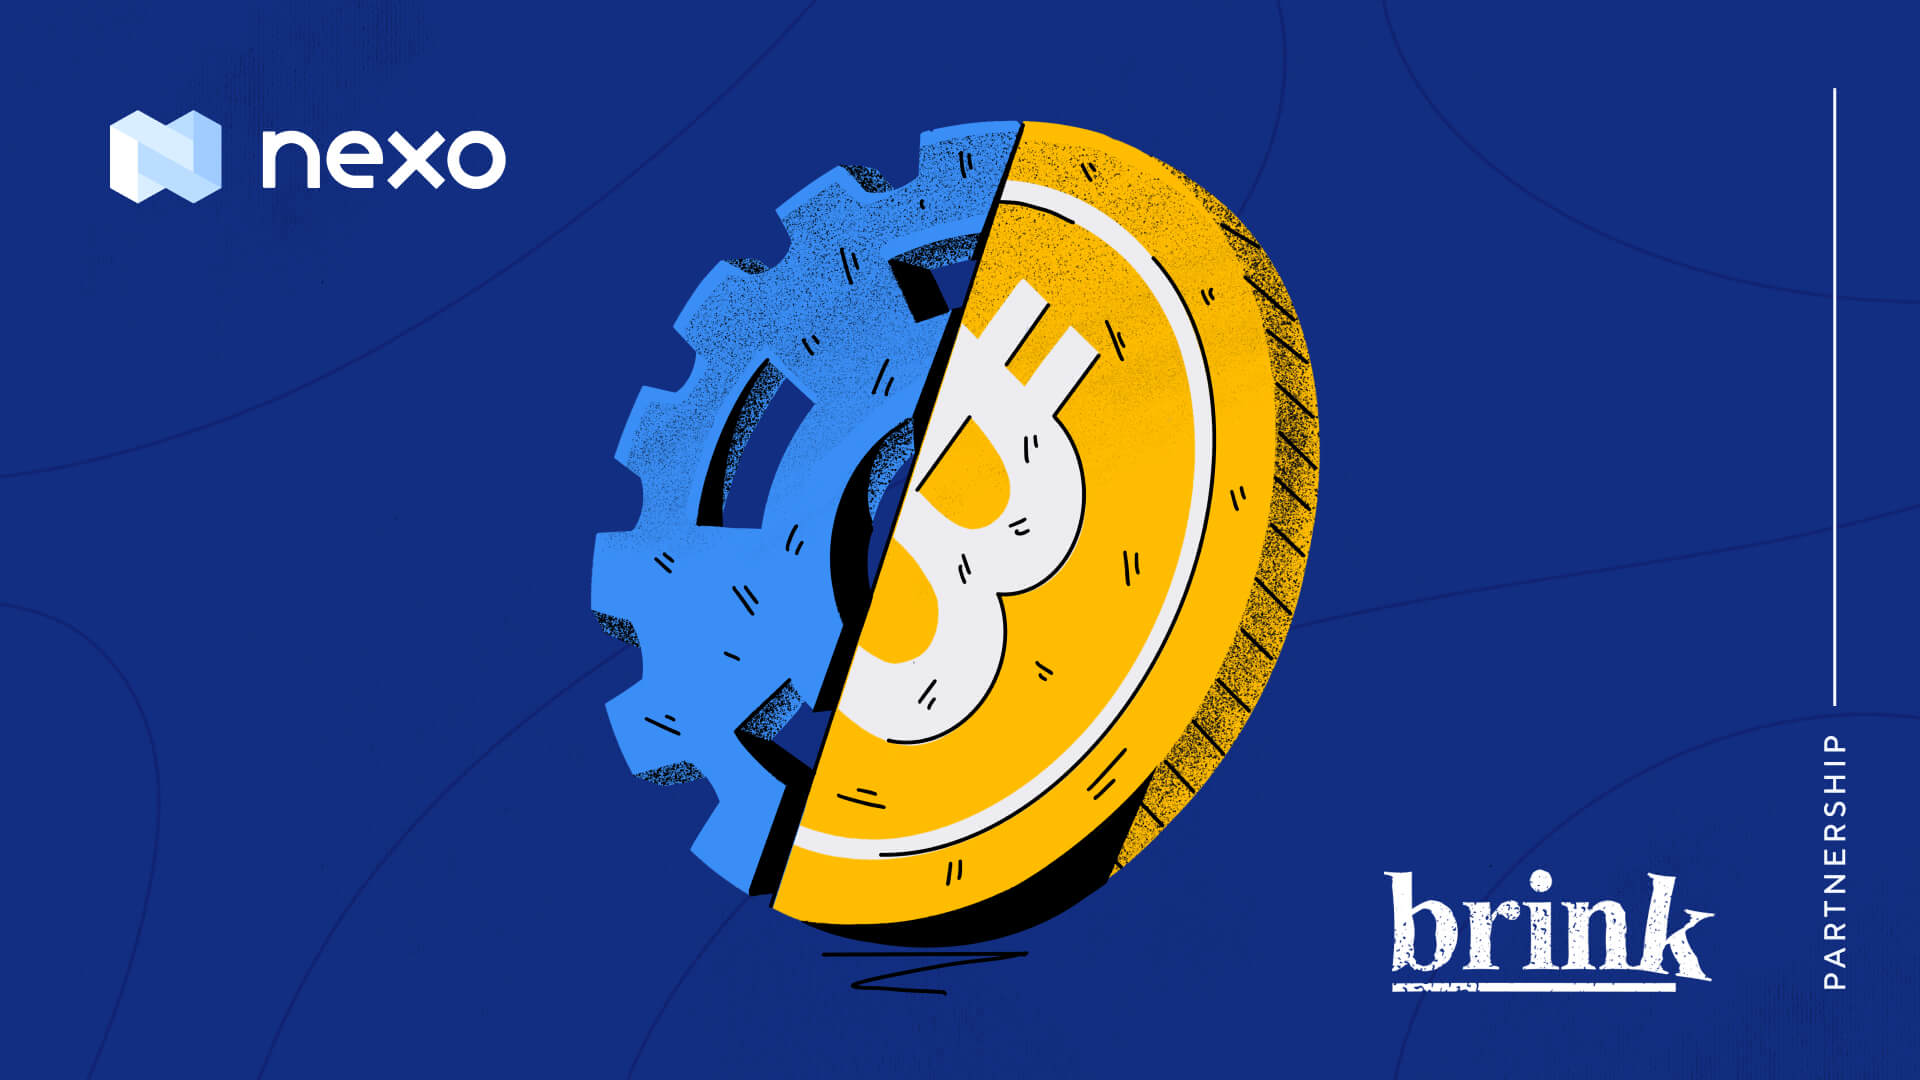 Nexo Invests in Brink: A Non-Profit Focused on Supporting Bitcoin Development